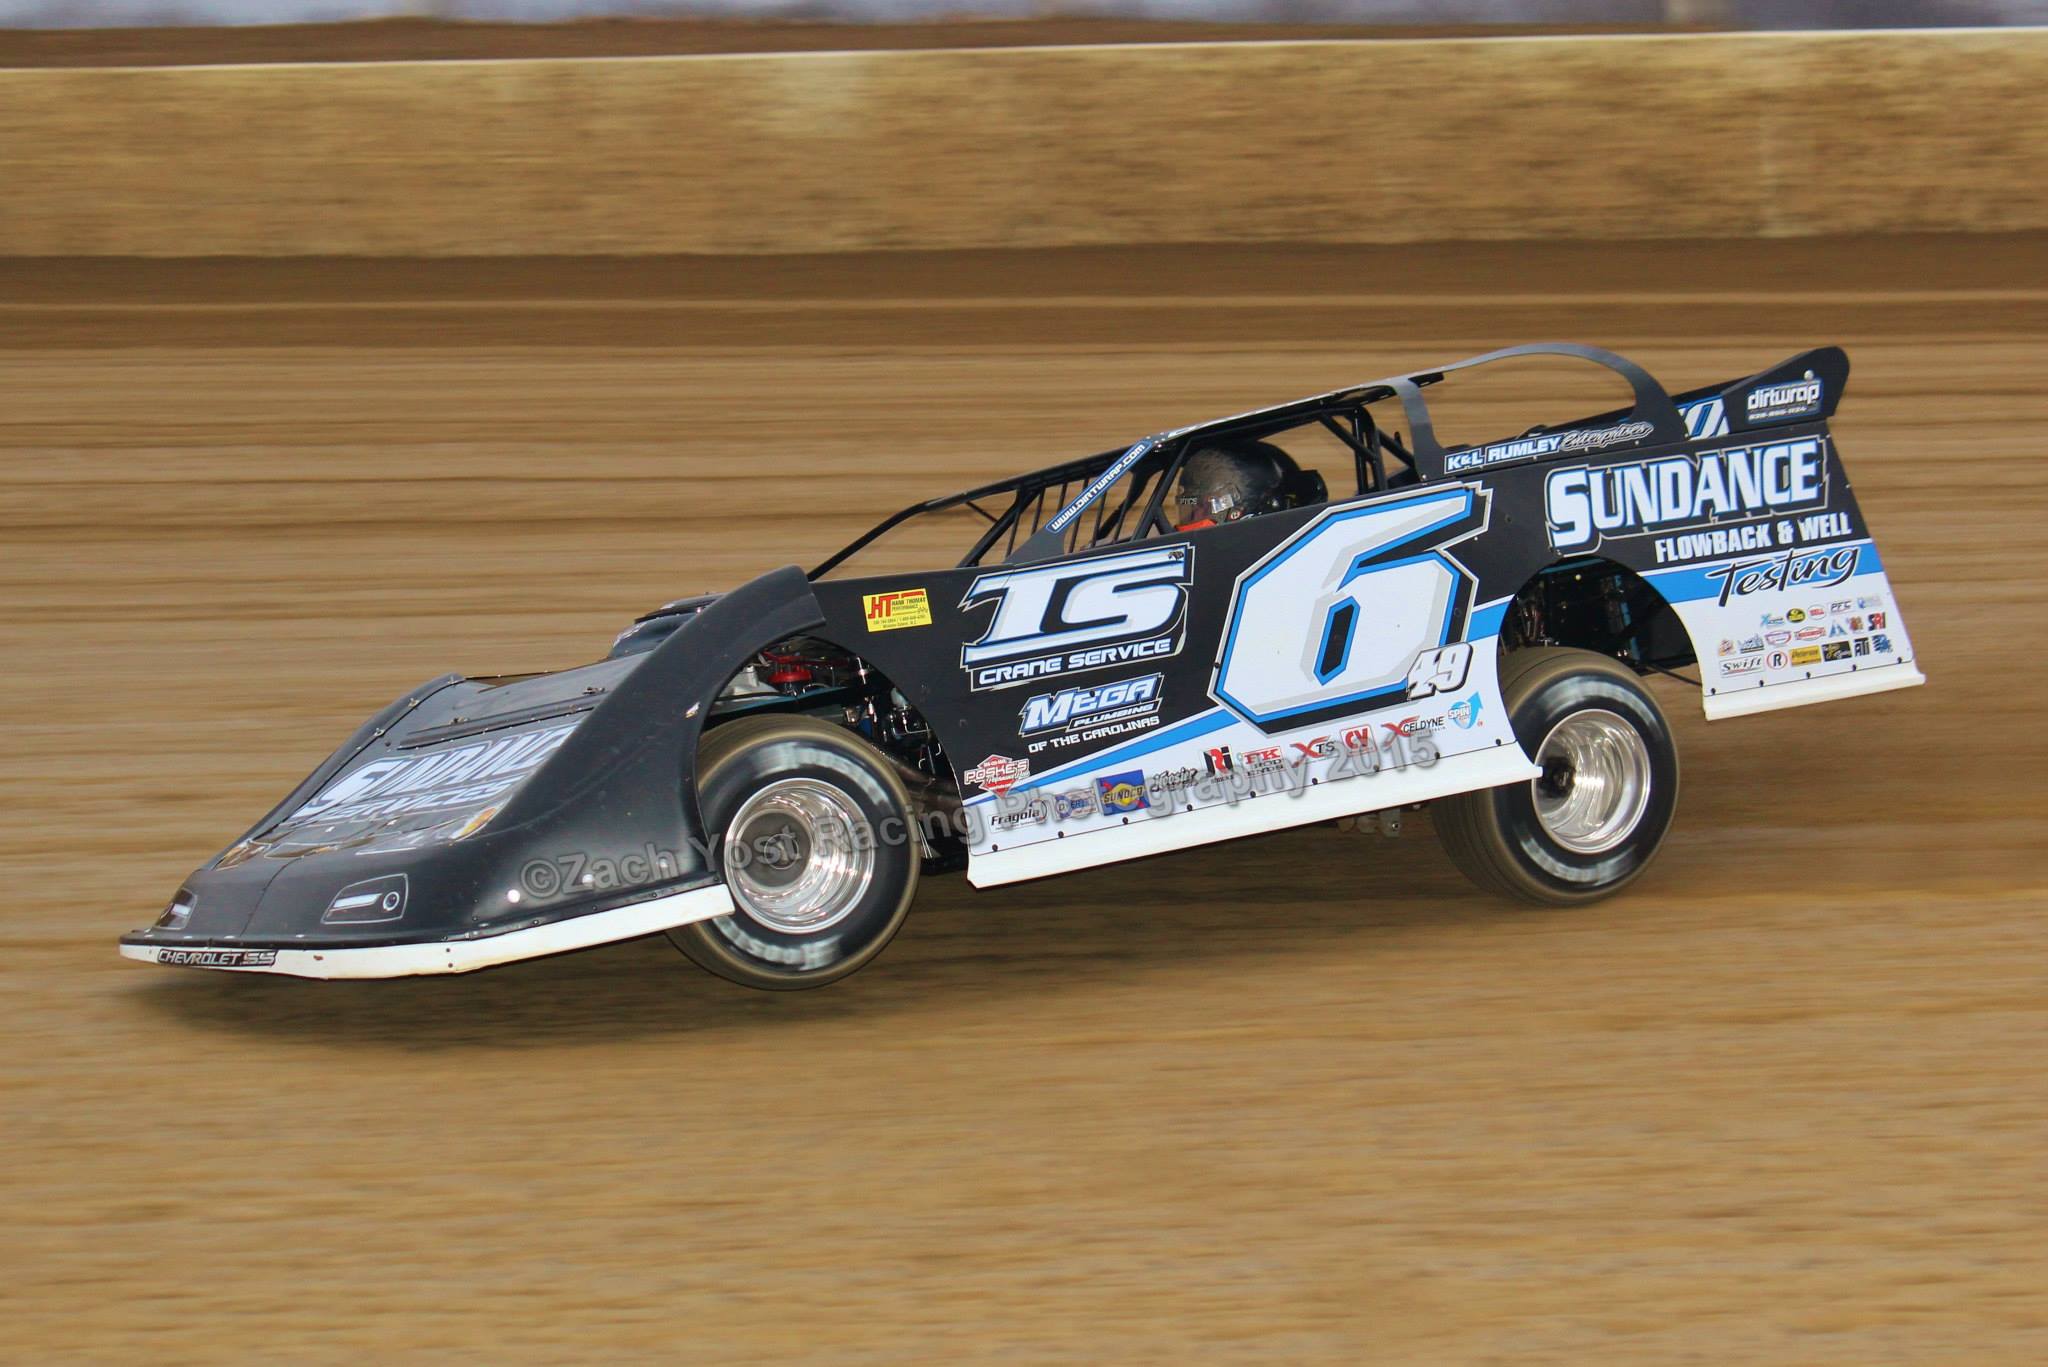 Lucas Oil Late Model Series Photos from Atomic Speedway by Zach Yost